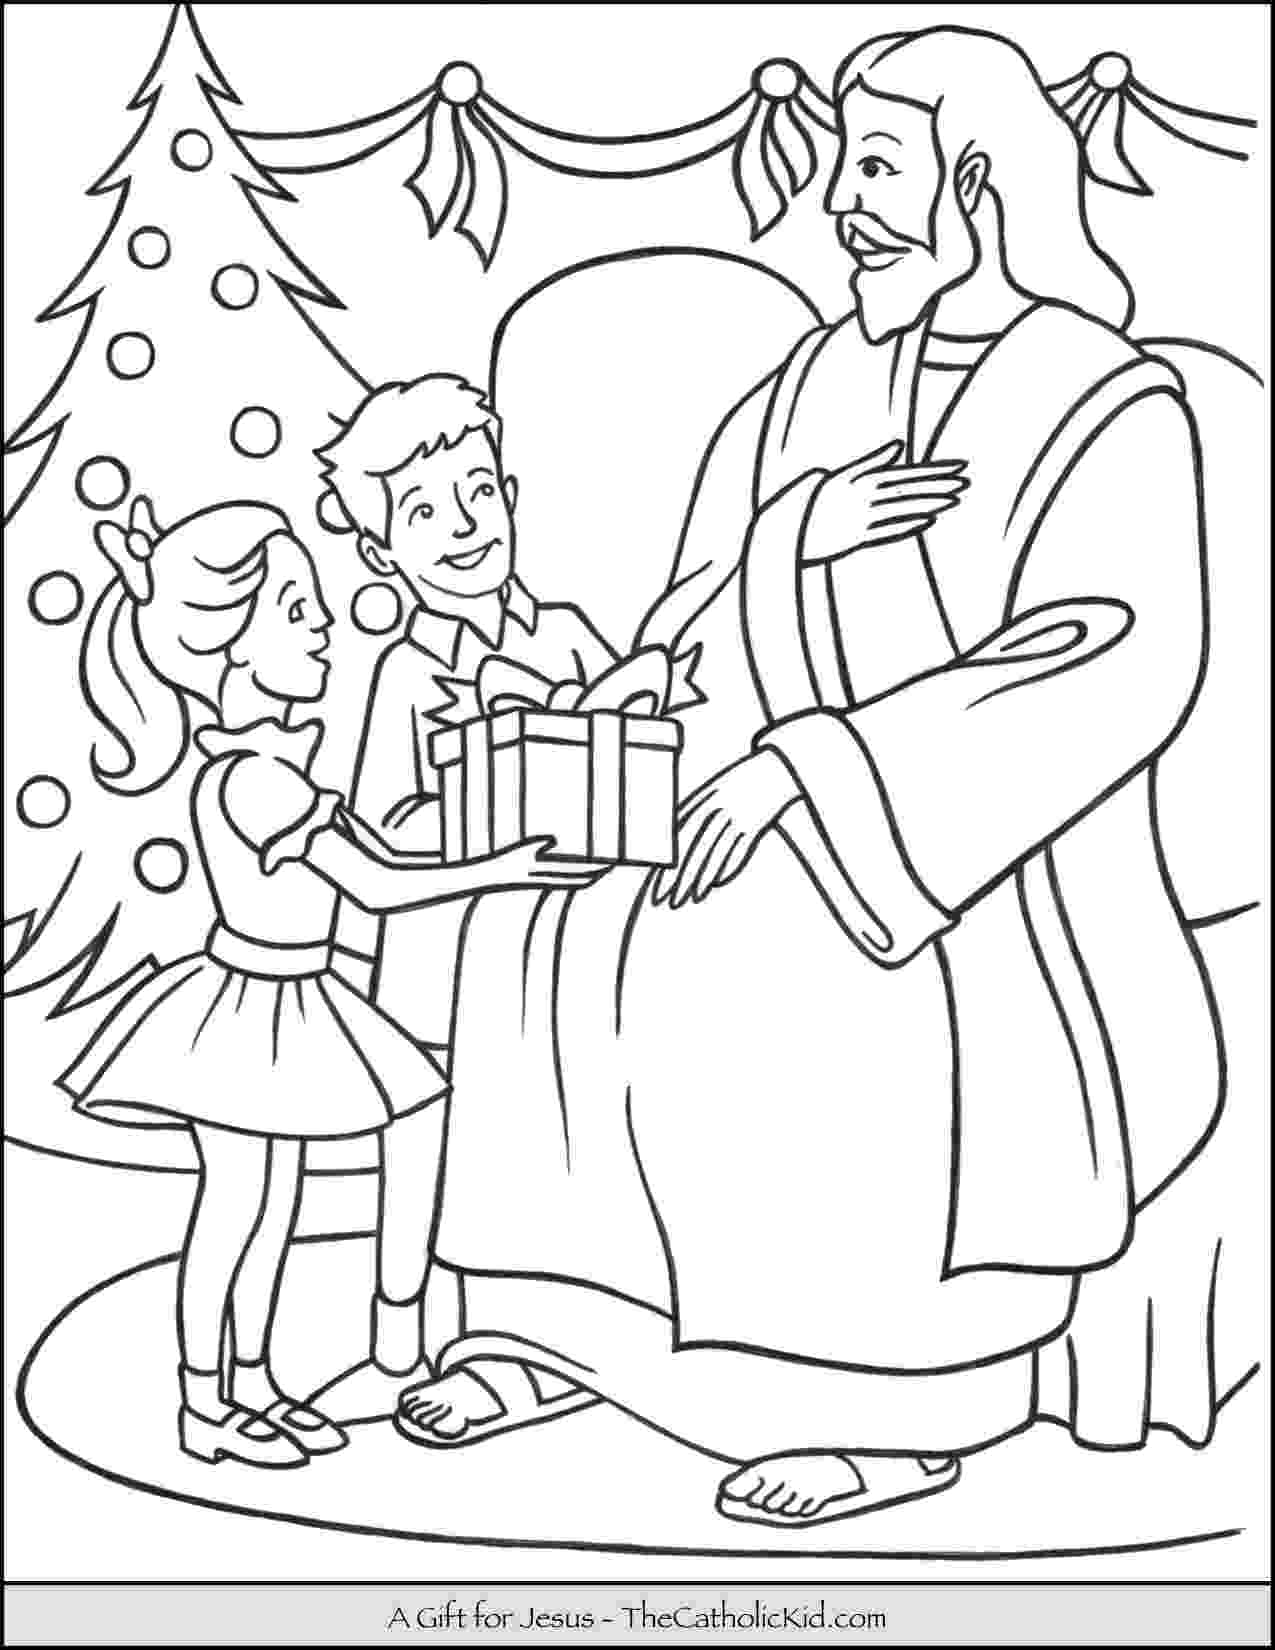 christmas coloring pages jesus a gift for jesus christmas coloring page thecatholickidcom pages coloring christmas jesus 